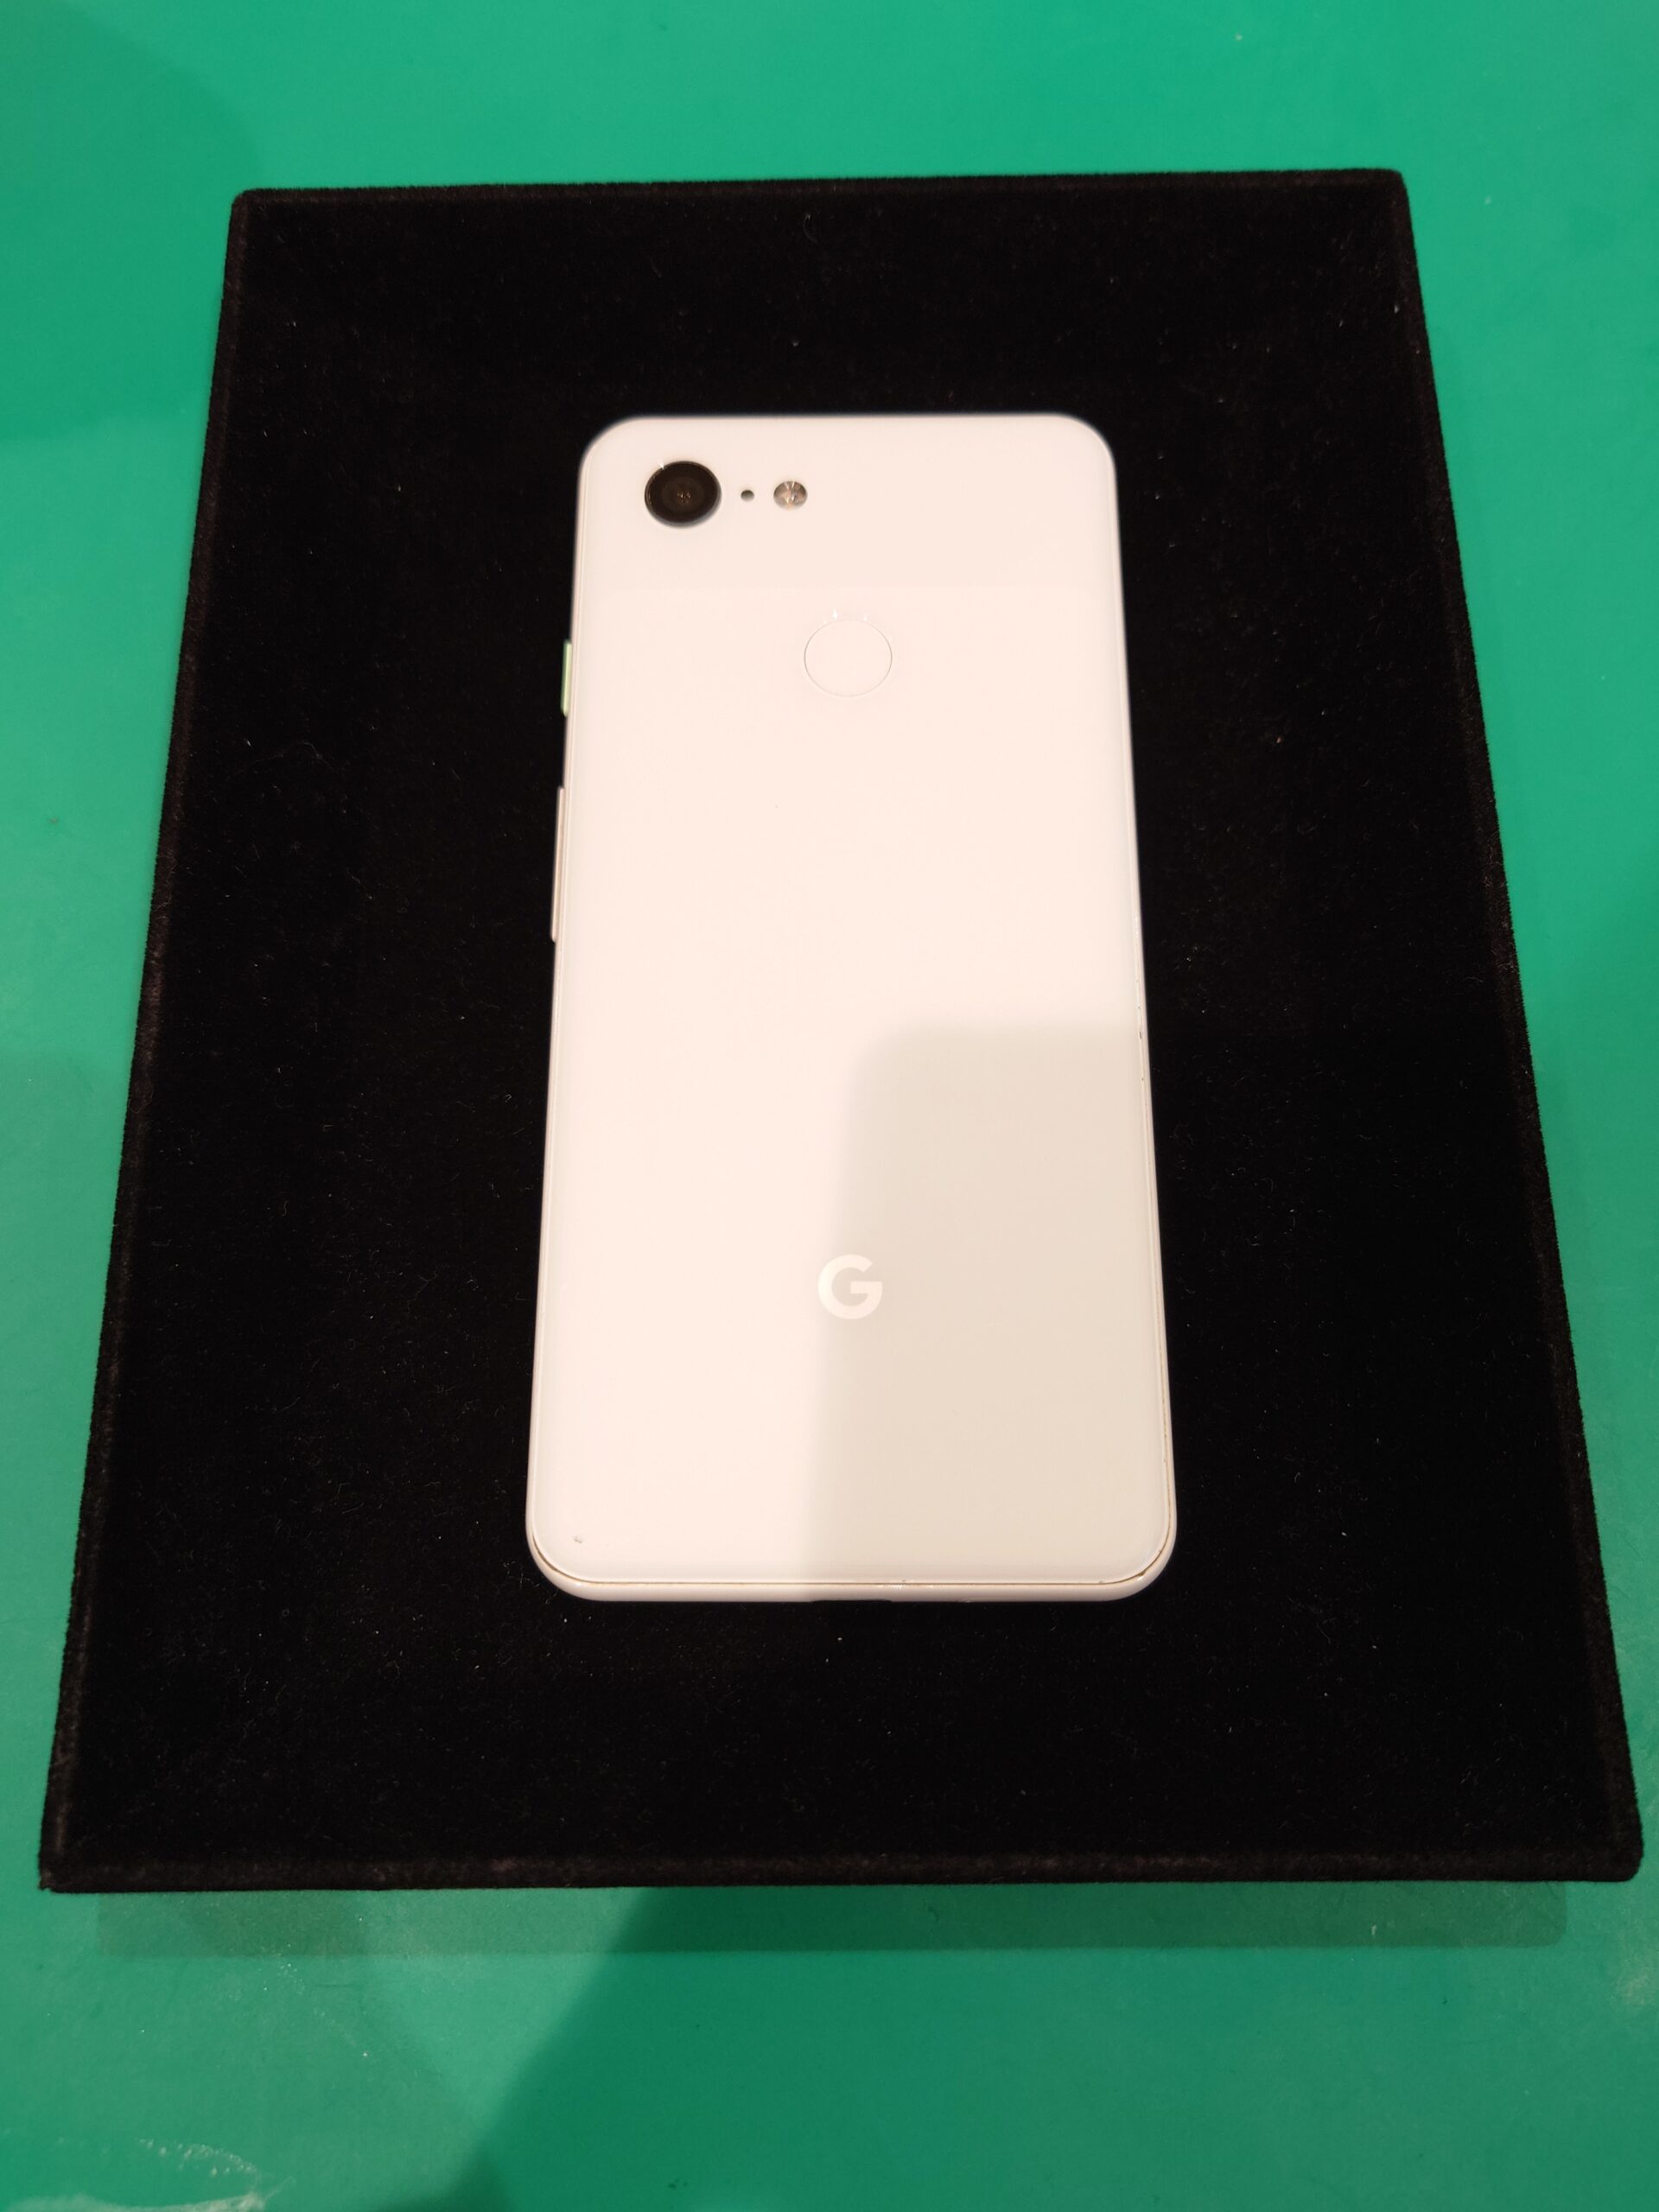 Google Pixel3 Clearly White 64GB ○　　　　　　　　　Aランク品【戸塚モディ店】